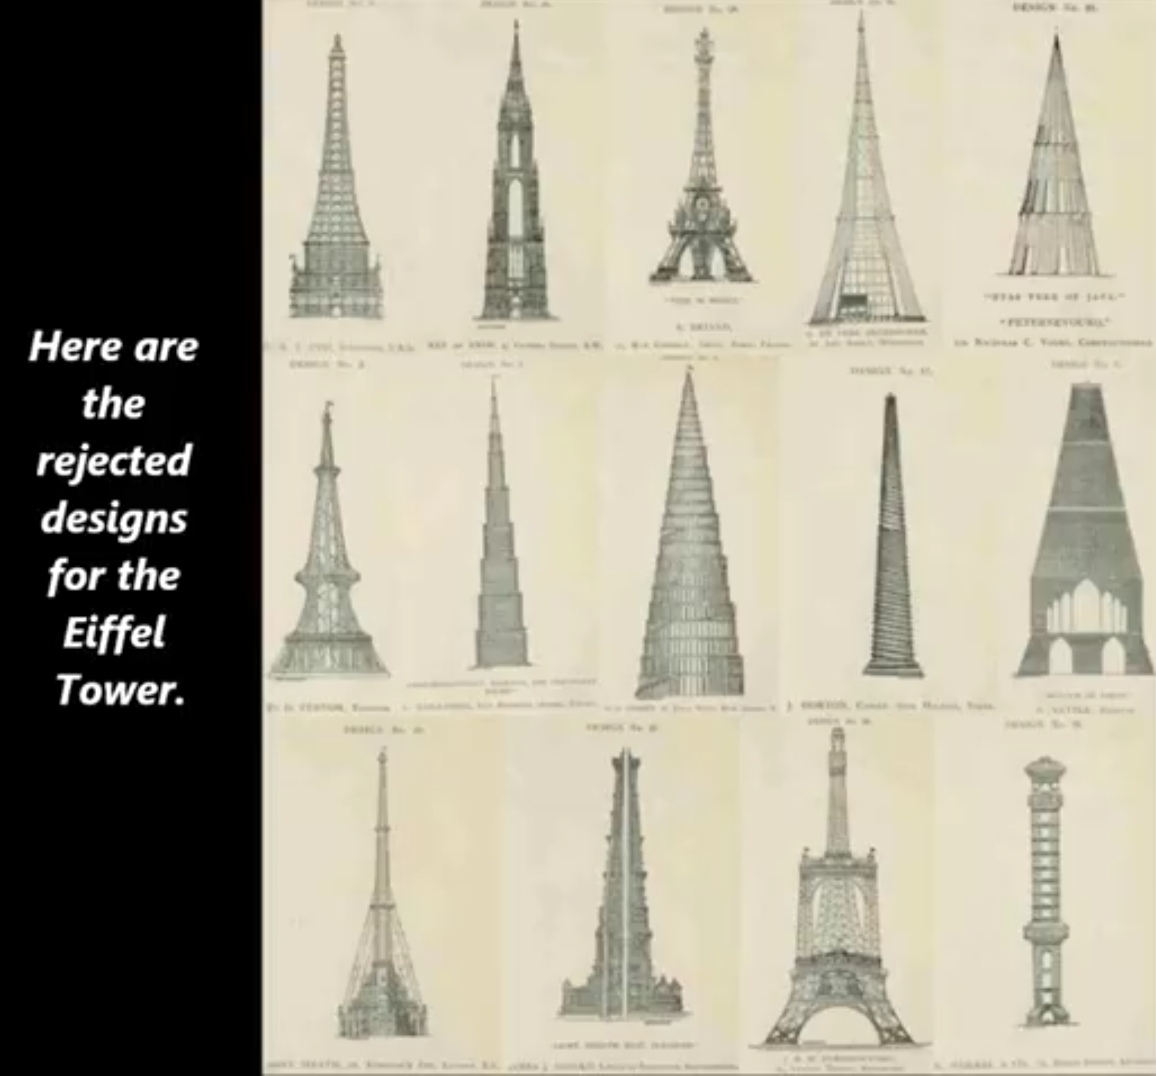 eiffel tower rejected designs - Here are the rejected designs for the Eiffel Tower.